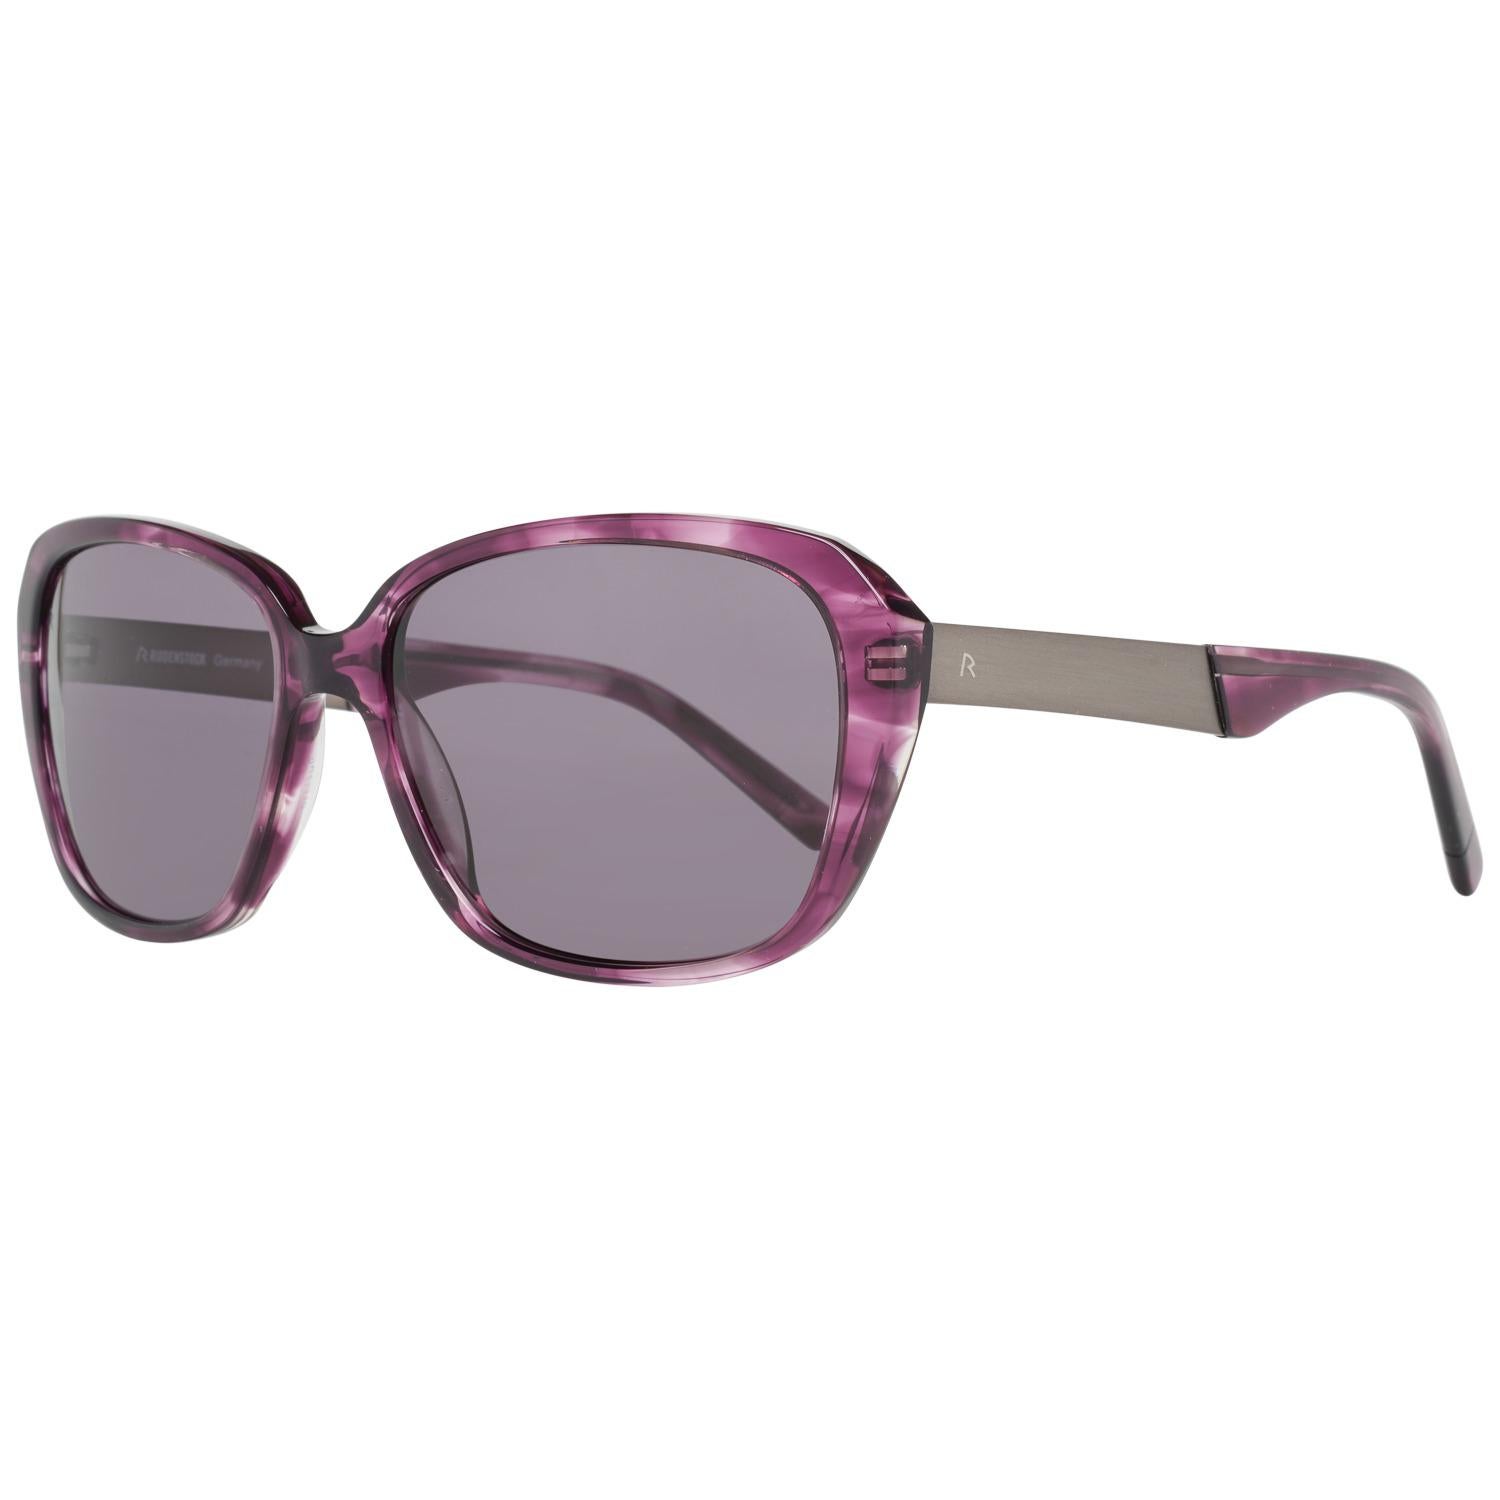 Details
MATERIAL: Metal
COLOR: Purple
MODEL: R3299 D 57
GENDER: Women
COUNTRY OF MANUFACTURE: China
TYPE: Sunglasses
ORIGINAL CASE?: Yes
STYLE: Square
OCCASION: Casual
FEATURES: Lightweight
LENS COLOR: Grey
LENS TECHNOLOGY: No Extra
YEAR